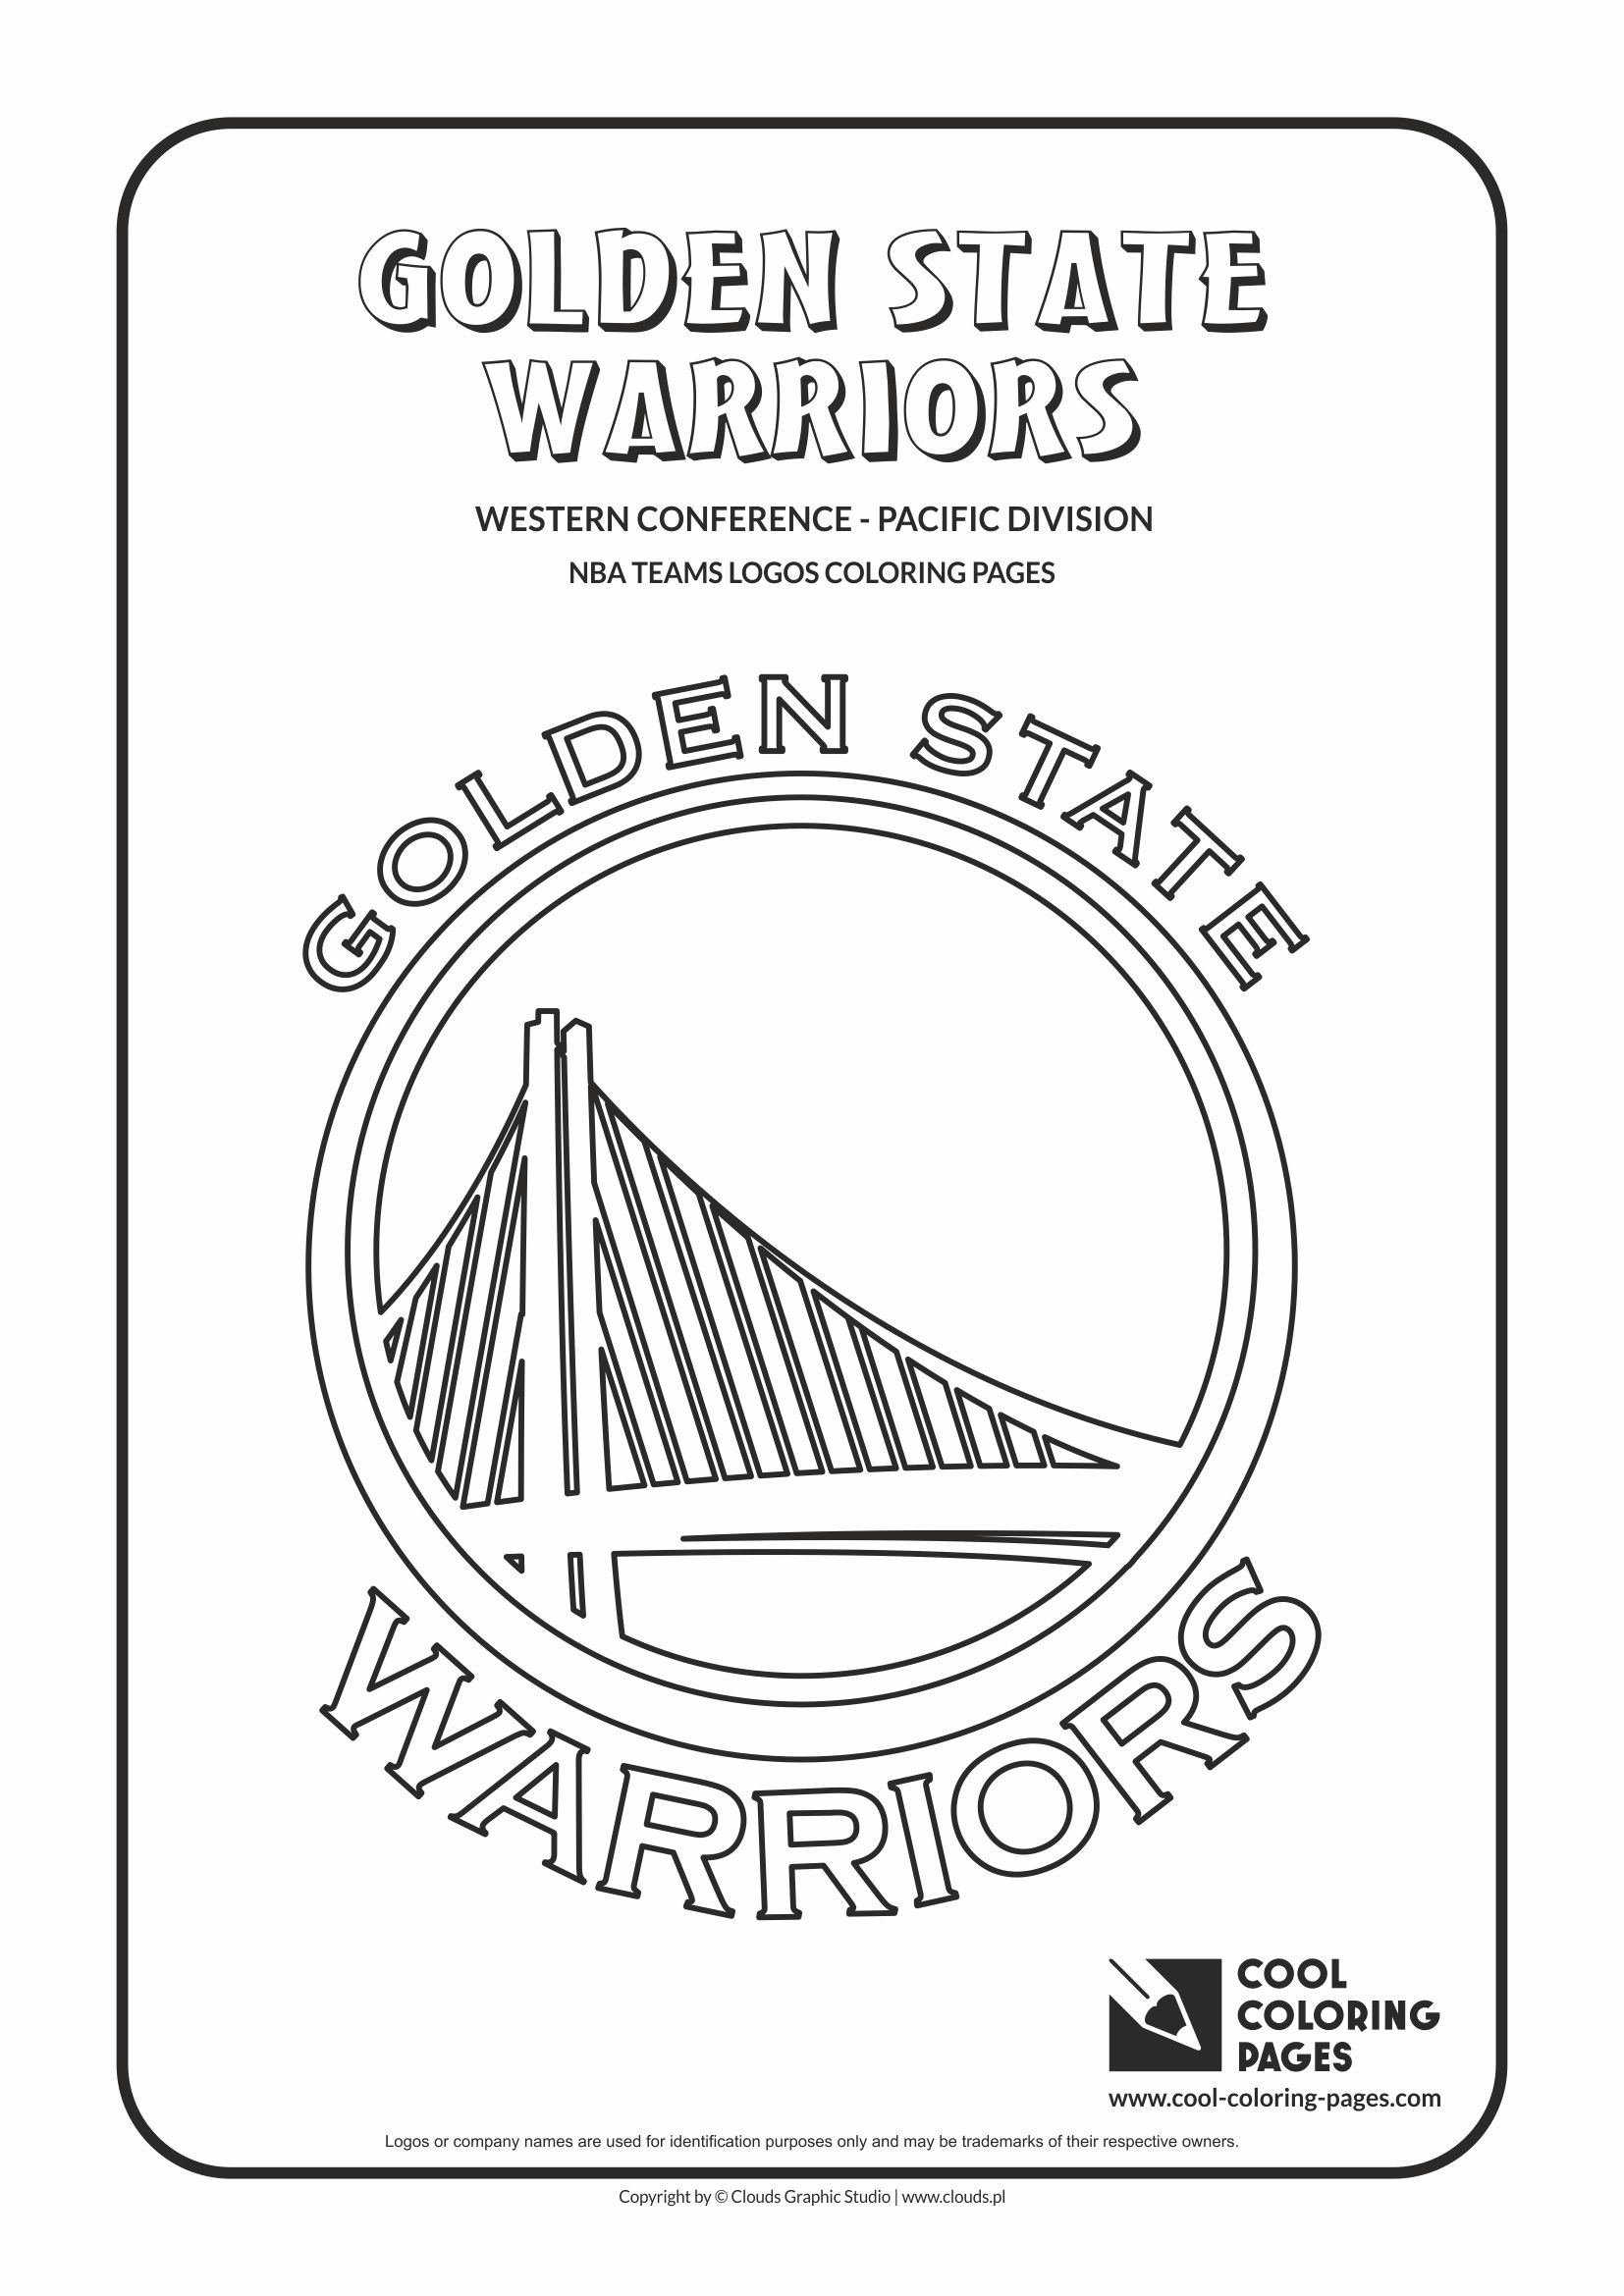 Cool Coloring Pages Golden State Warriors NBA basketball teams logos